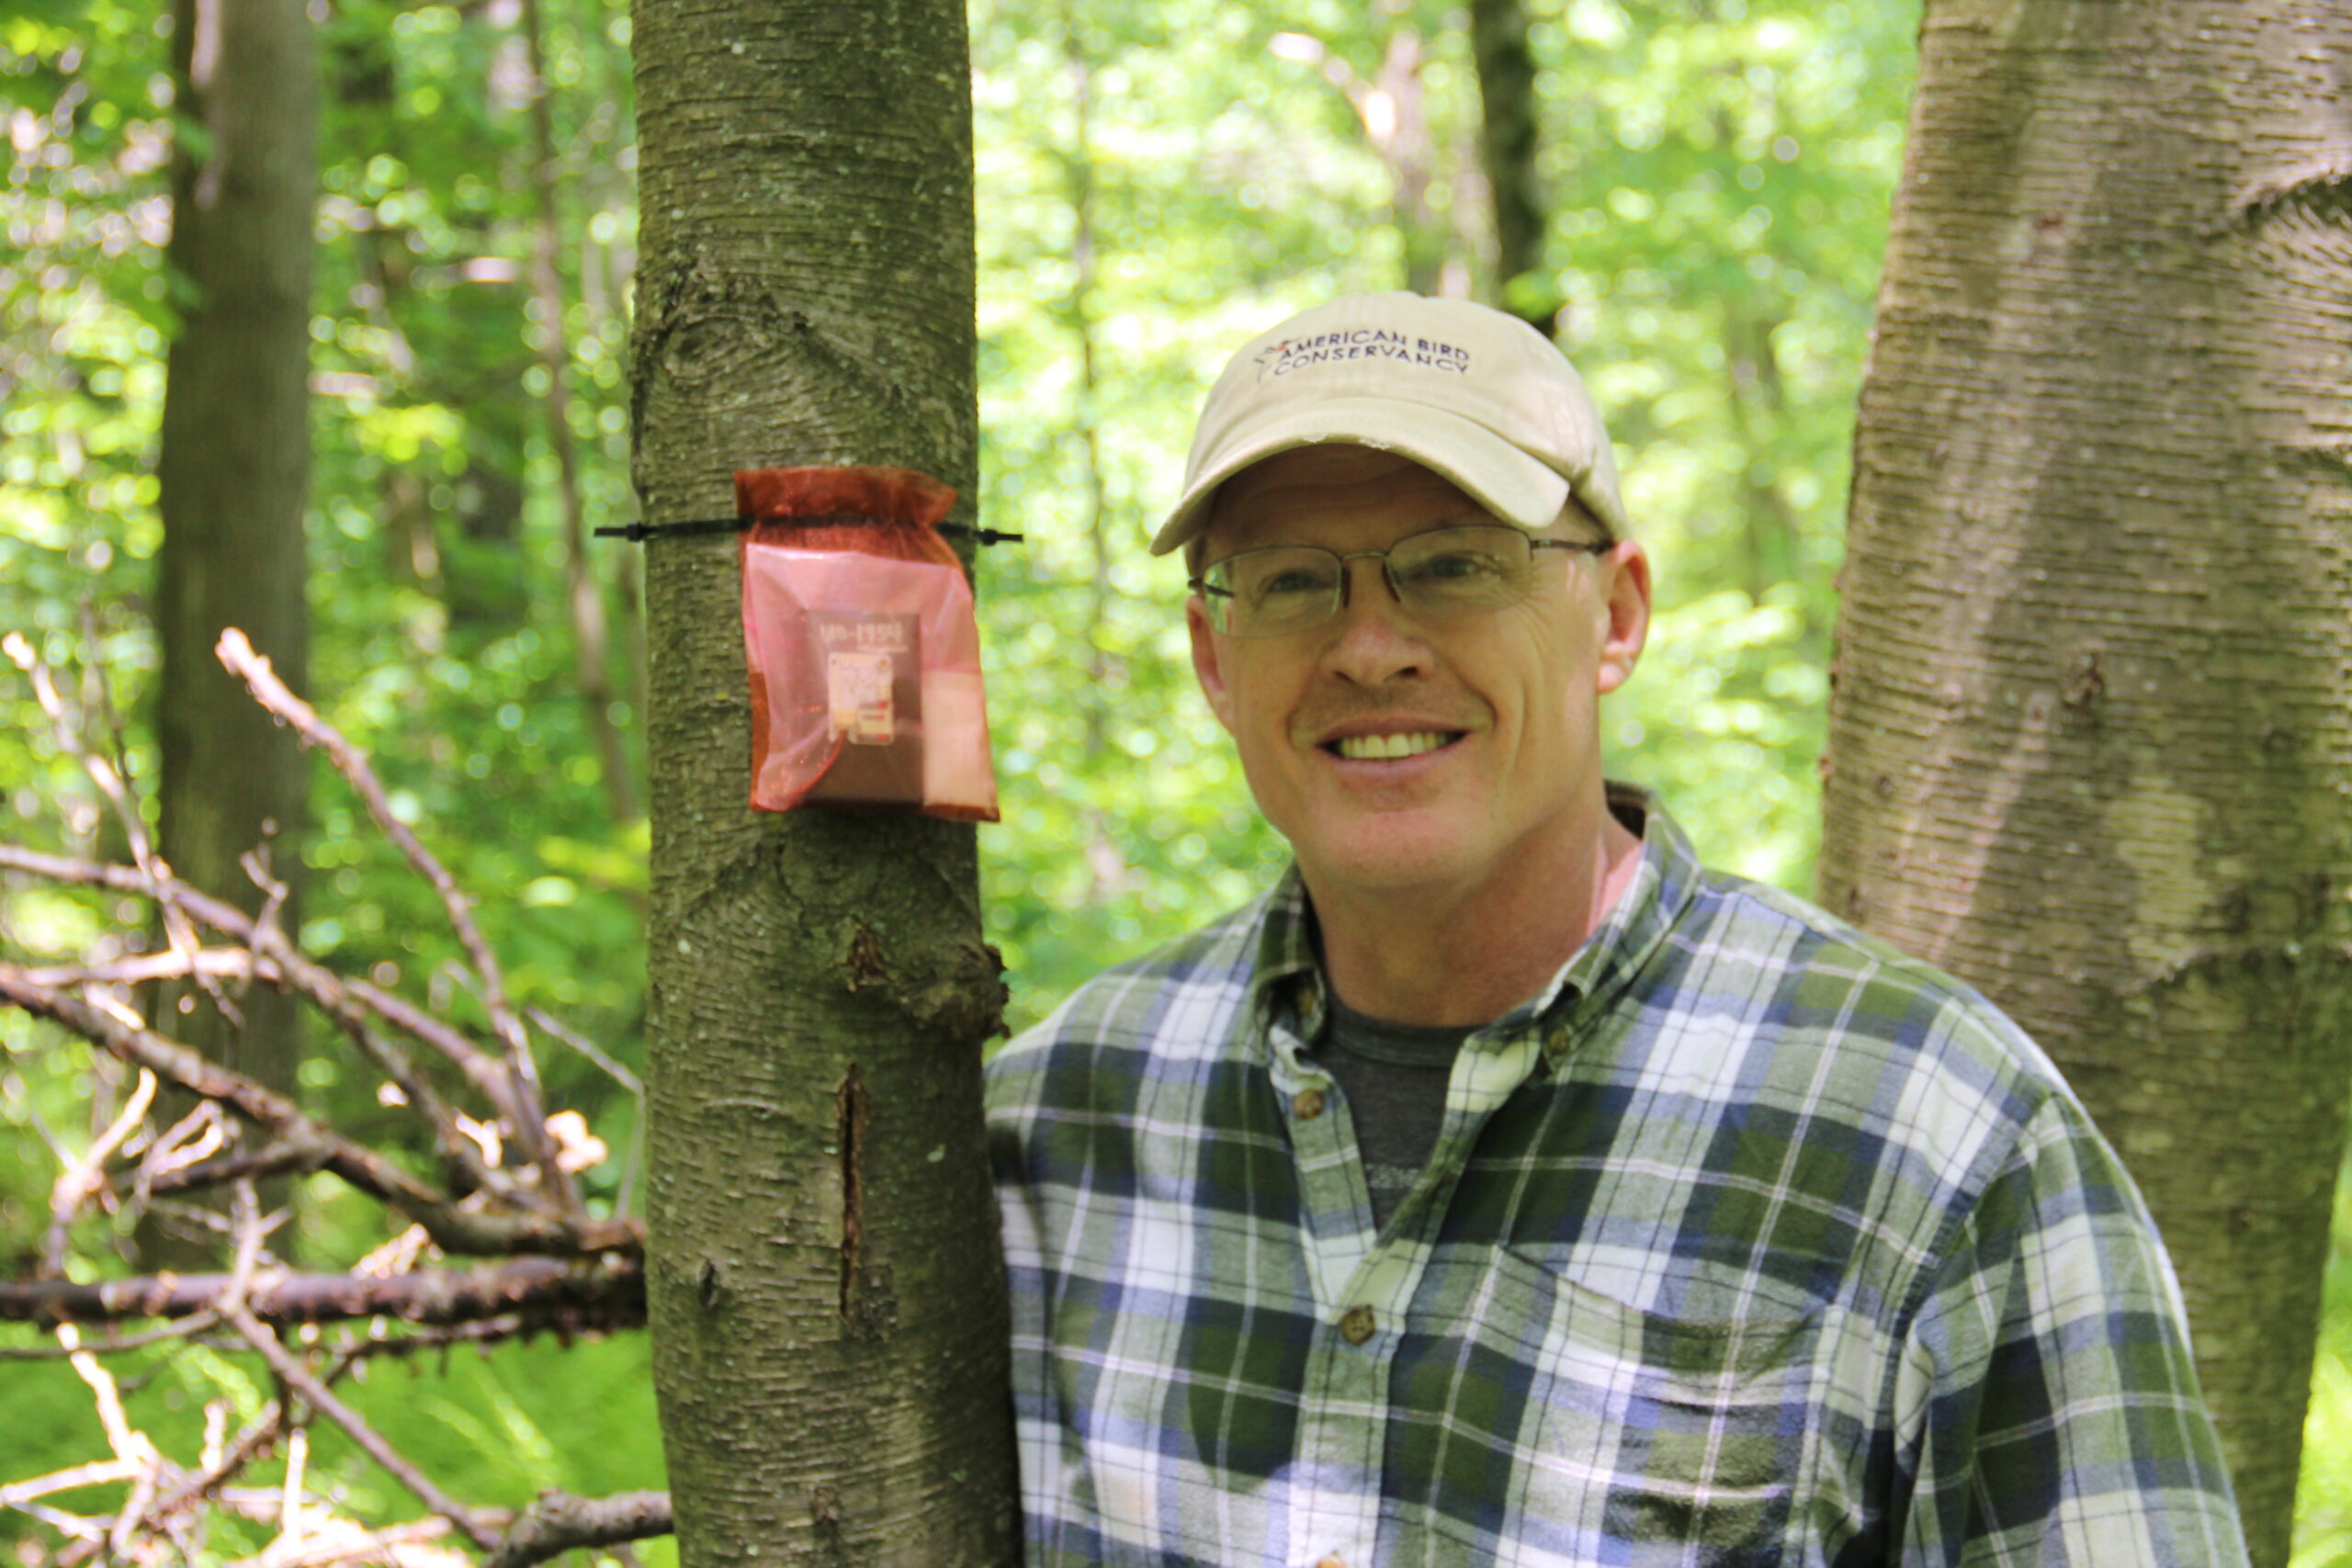 Man in a plaid shirt and a cap standing next to a tree with a red baggie attached to it.